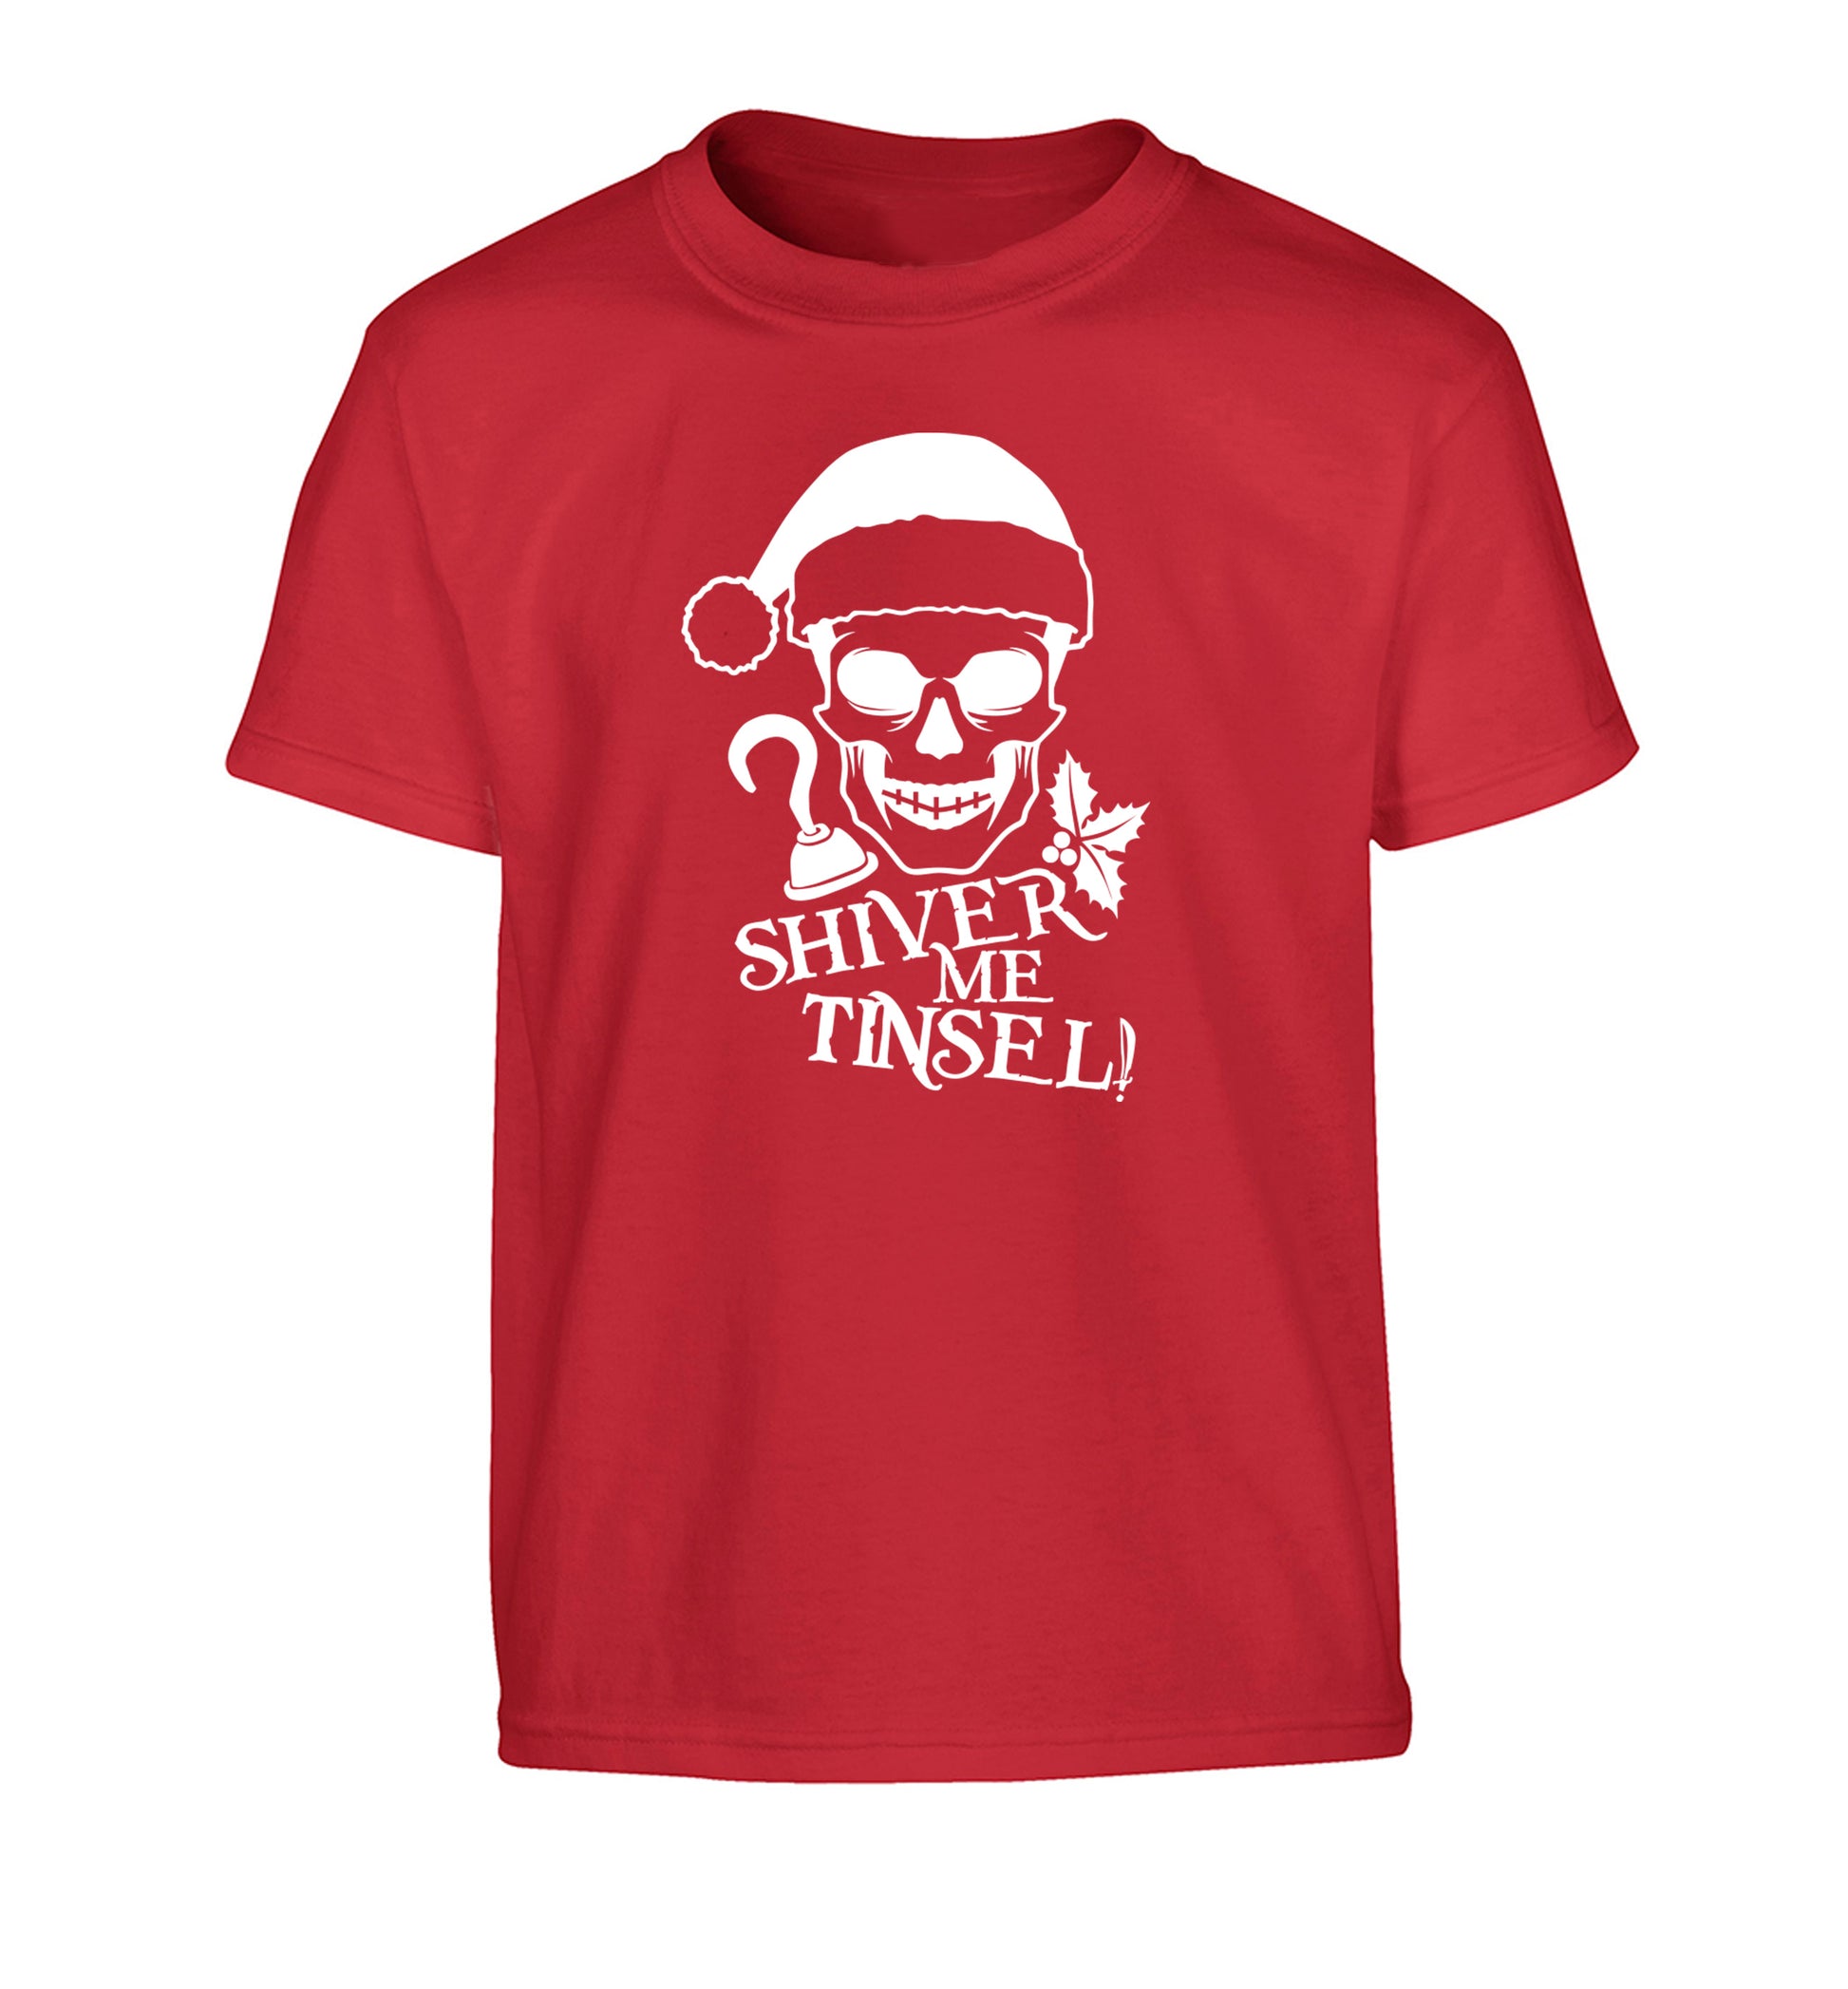 Shiver me tinsel Children's red Tshirt 12-14 Years